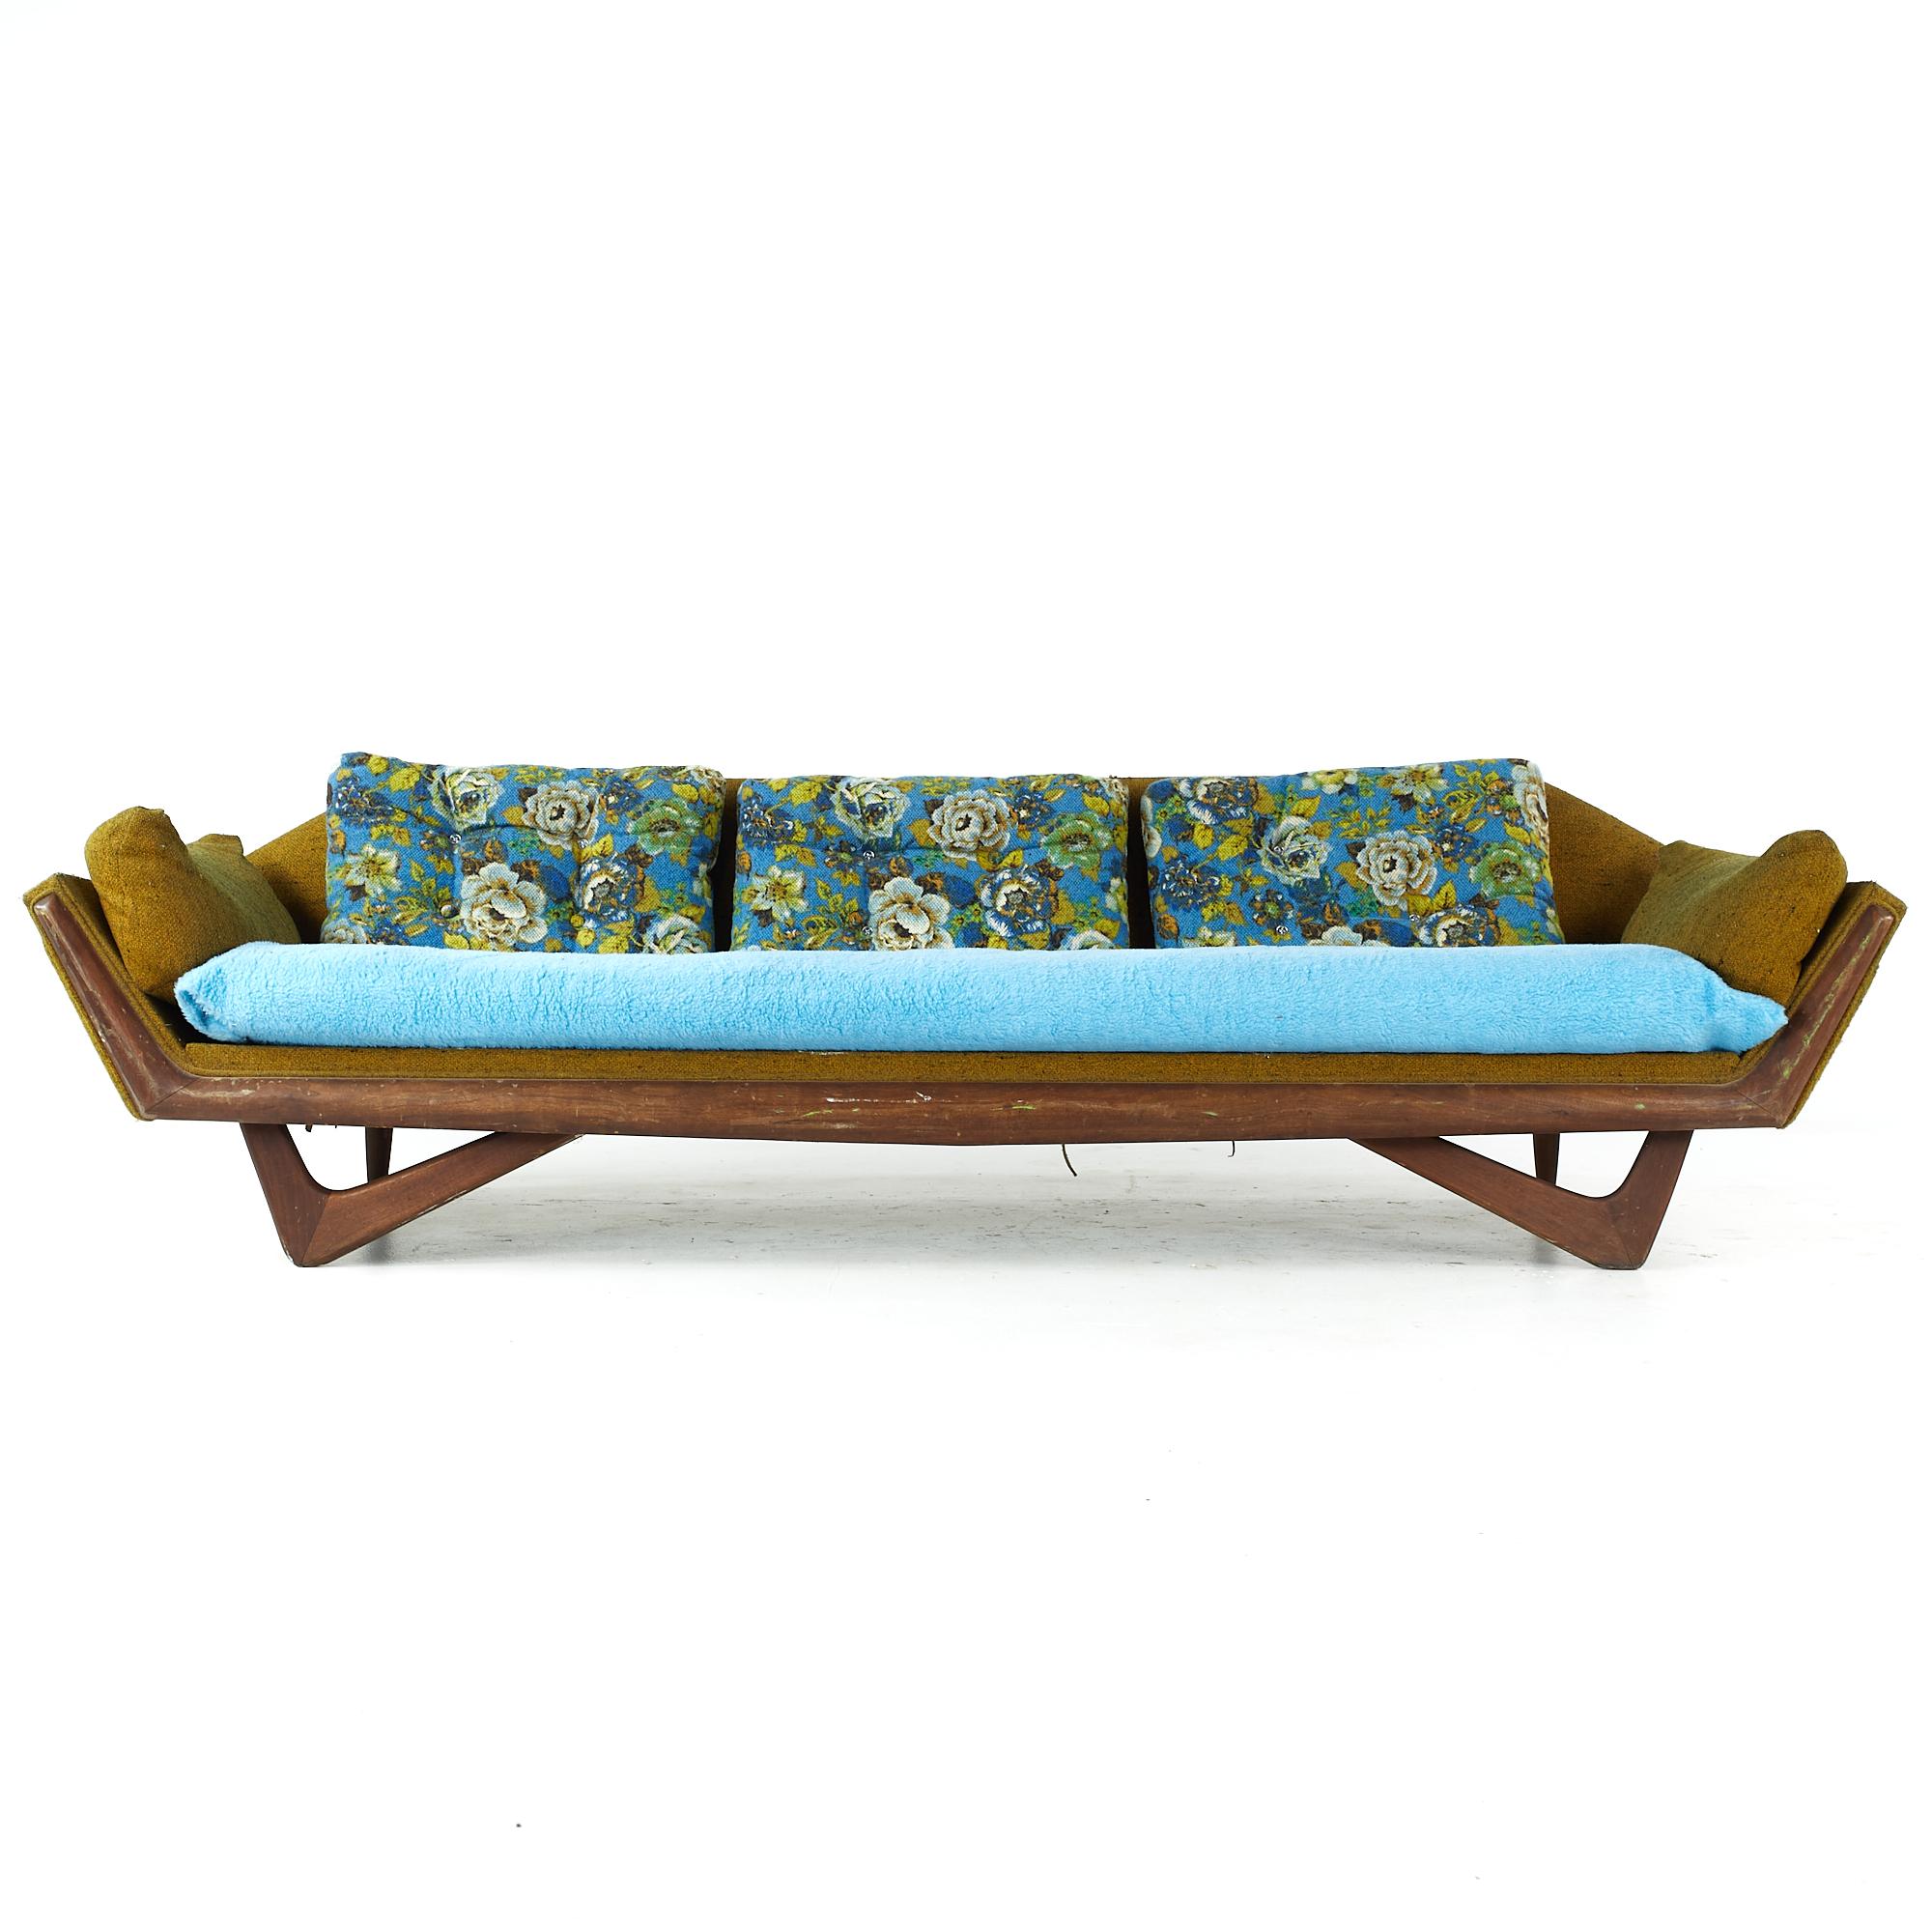 Adrian Pearsall Style midcentury walnut gondola sofa

This sofa measures: 101 wide x 33 deep x 27 inches high, with a seat height of 17 and arm height of 21.5 inches

All pieces of furniture can be had in what we call restored vintage condition.